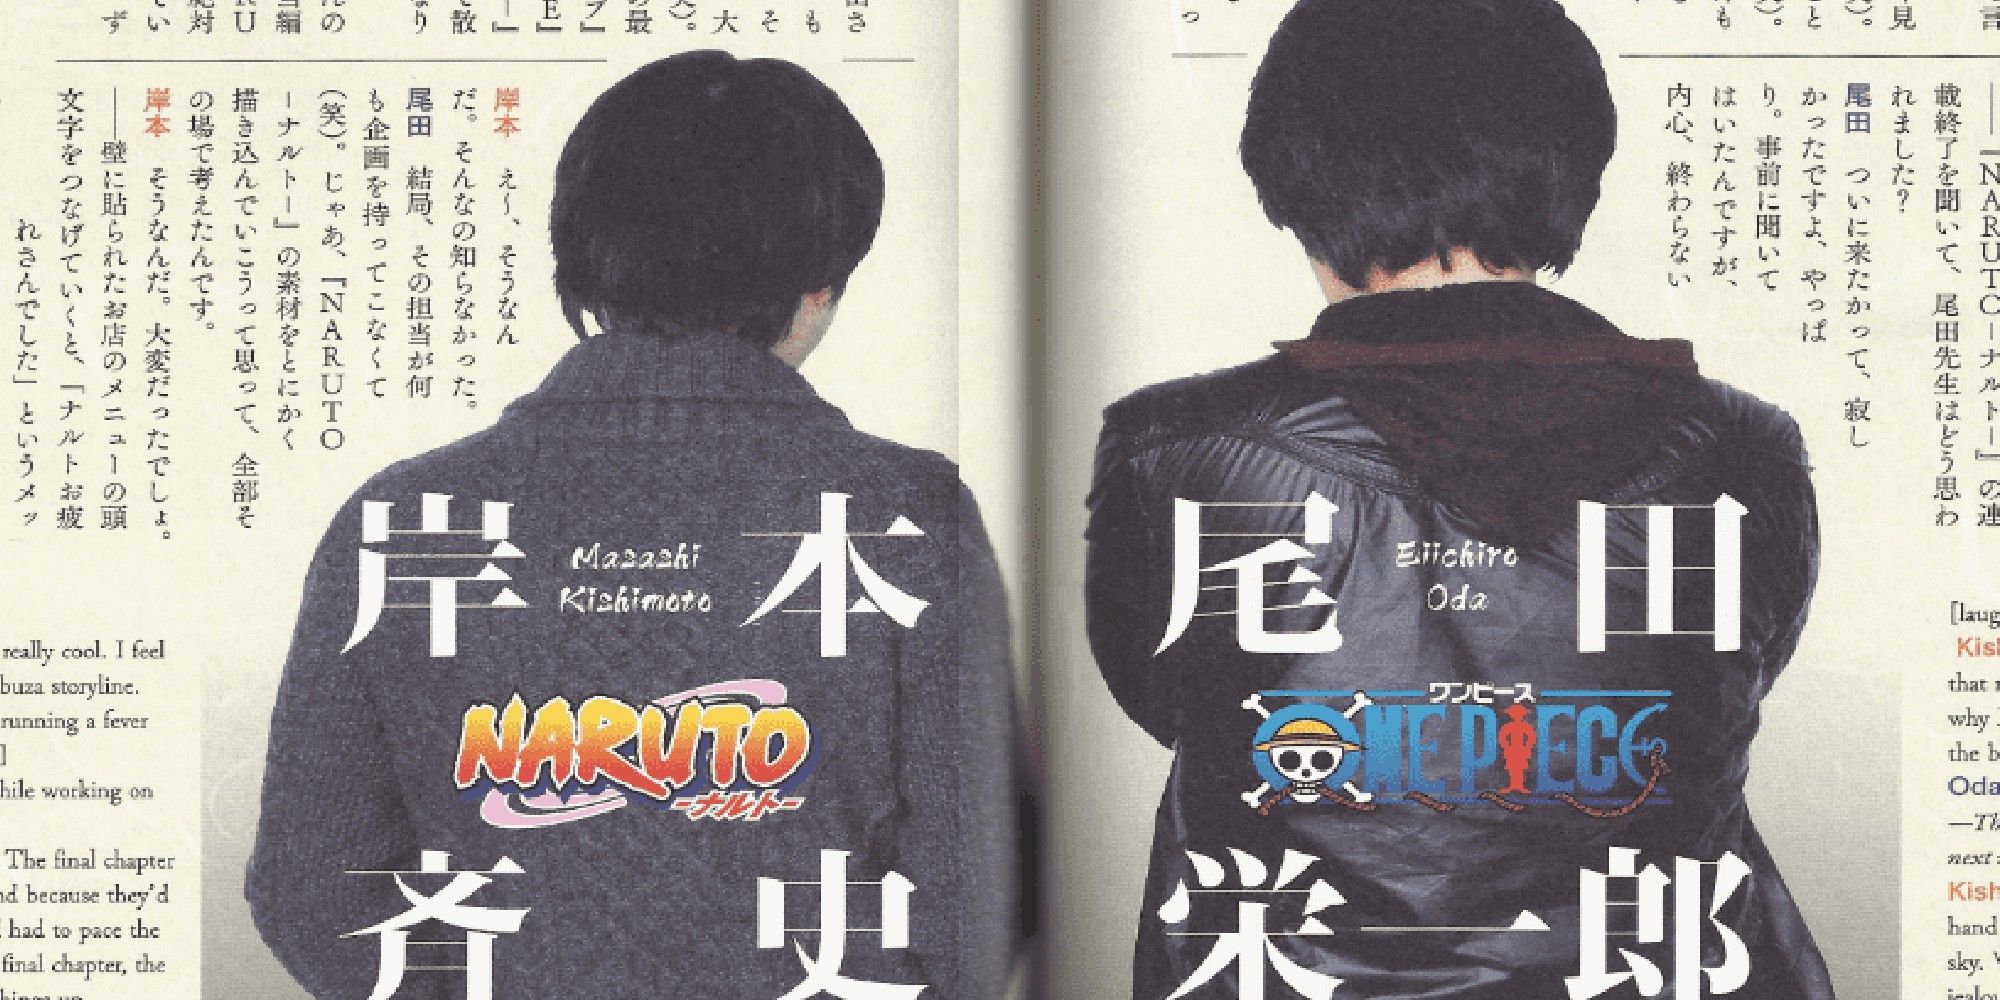 Back shot image of Kishimot and Oda wearing jackets with the logo of their series displayed on it